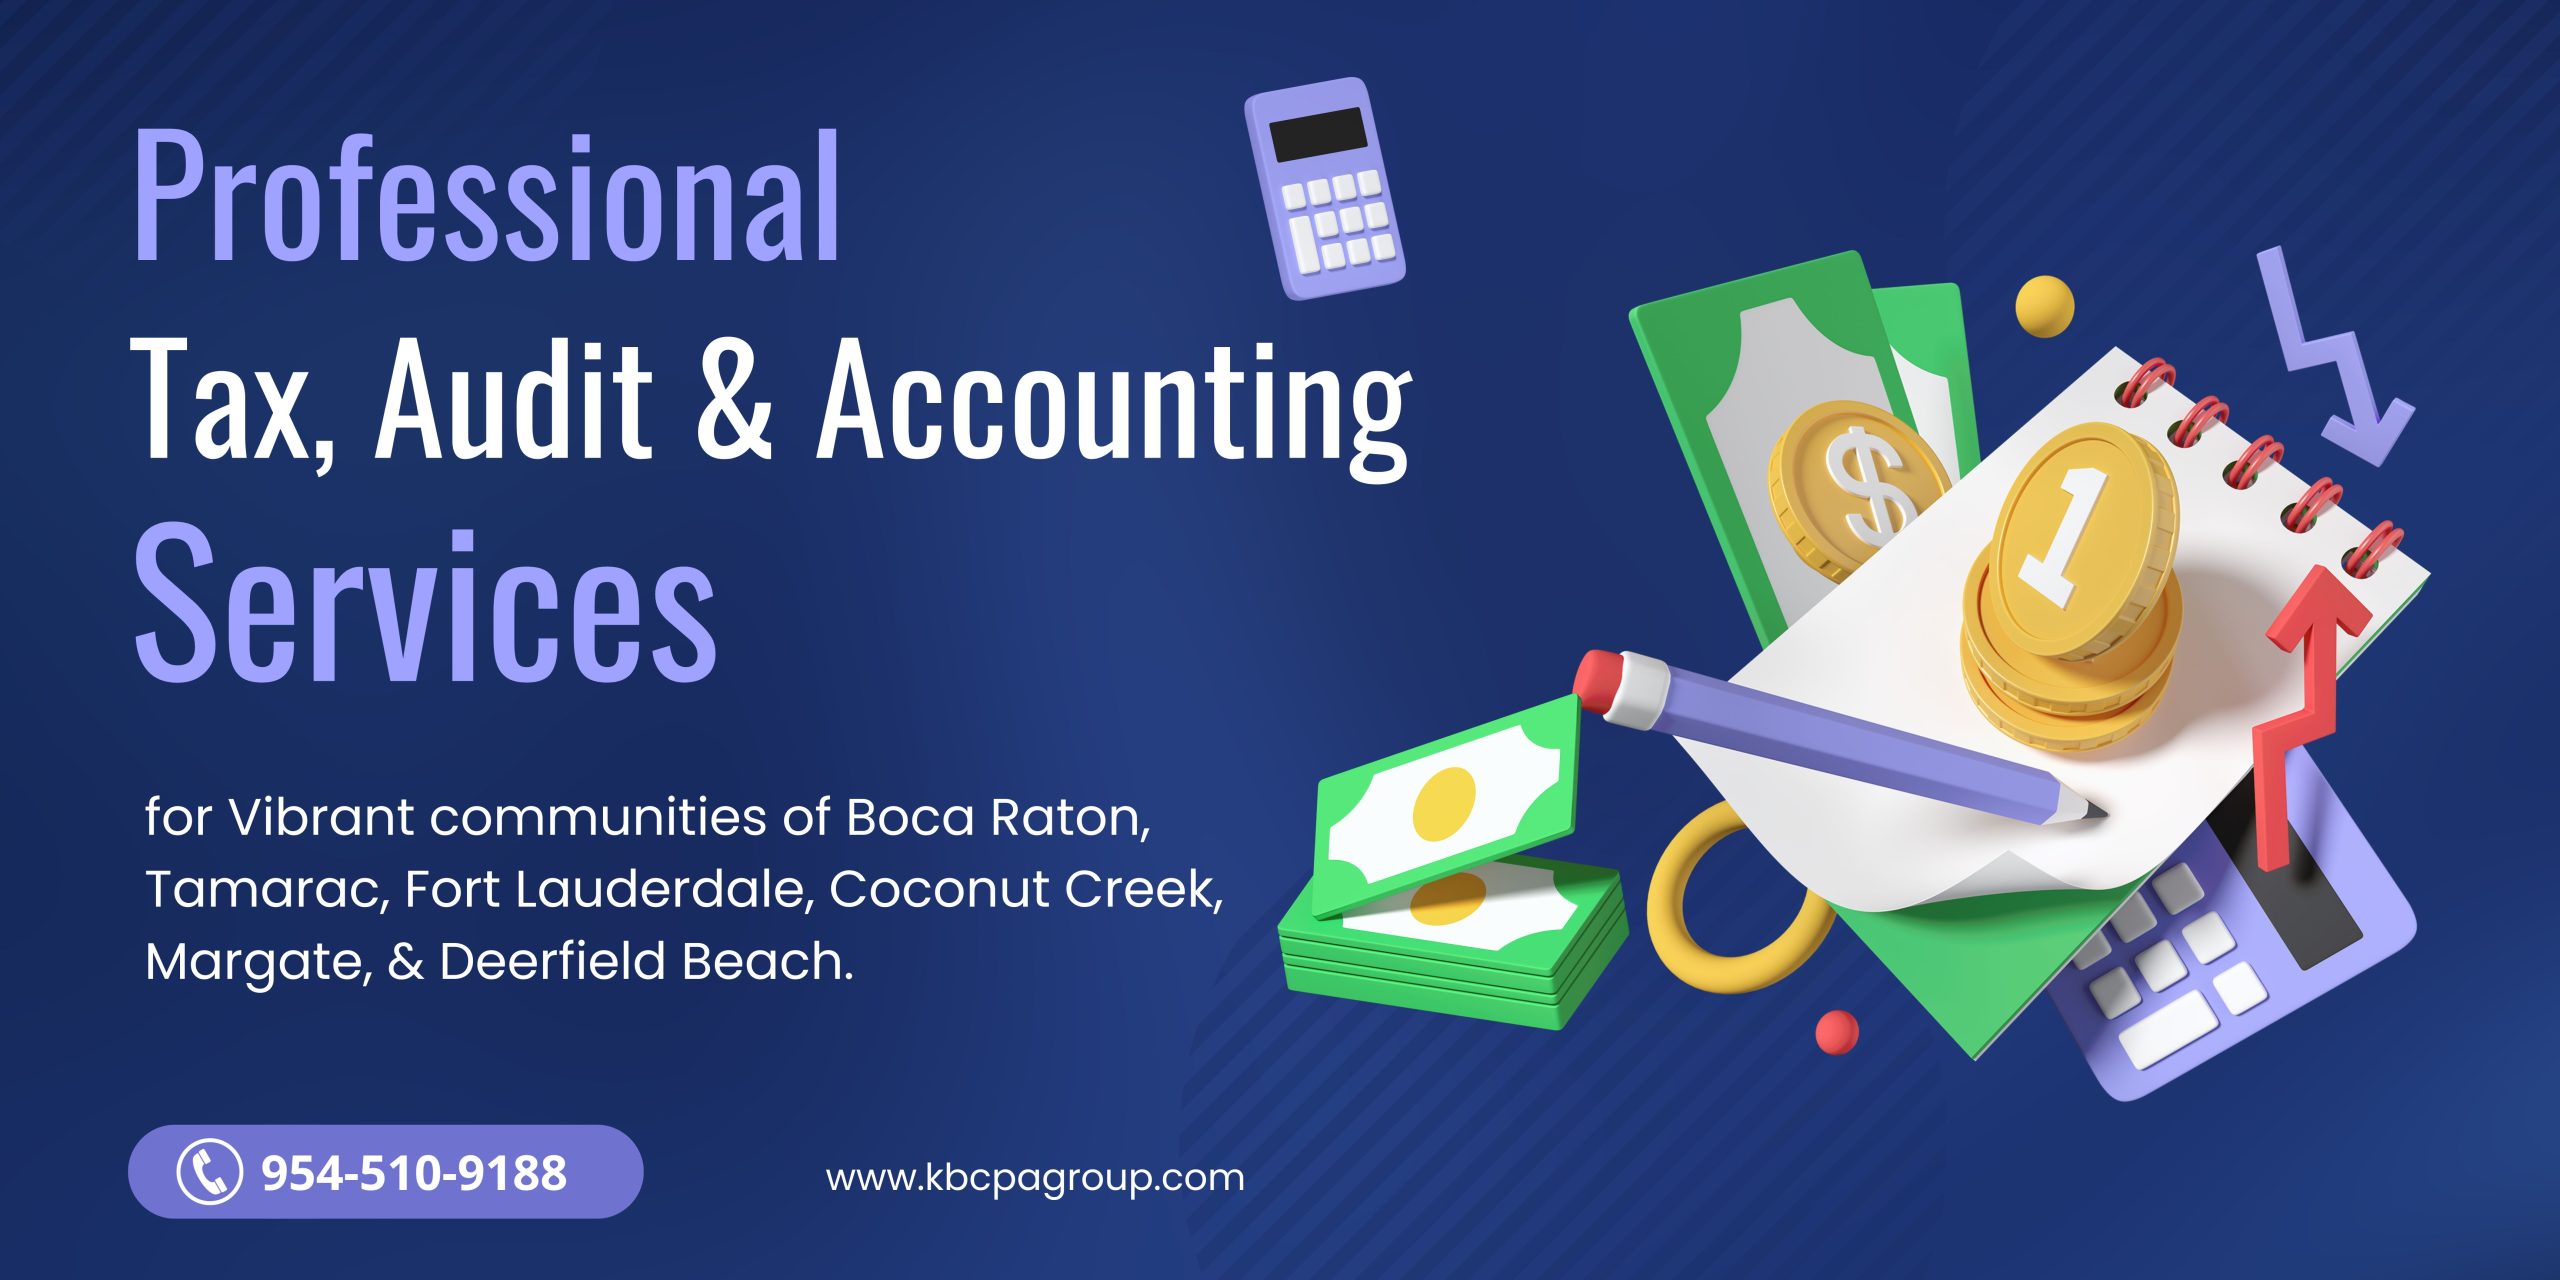 Tax, Audit & Accounting services by KB CPA @ Coral Springs Boca Raton Tamarac Deerfield Beac Margate Coconut Creek Fort Lauderdale